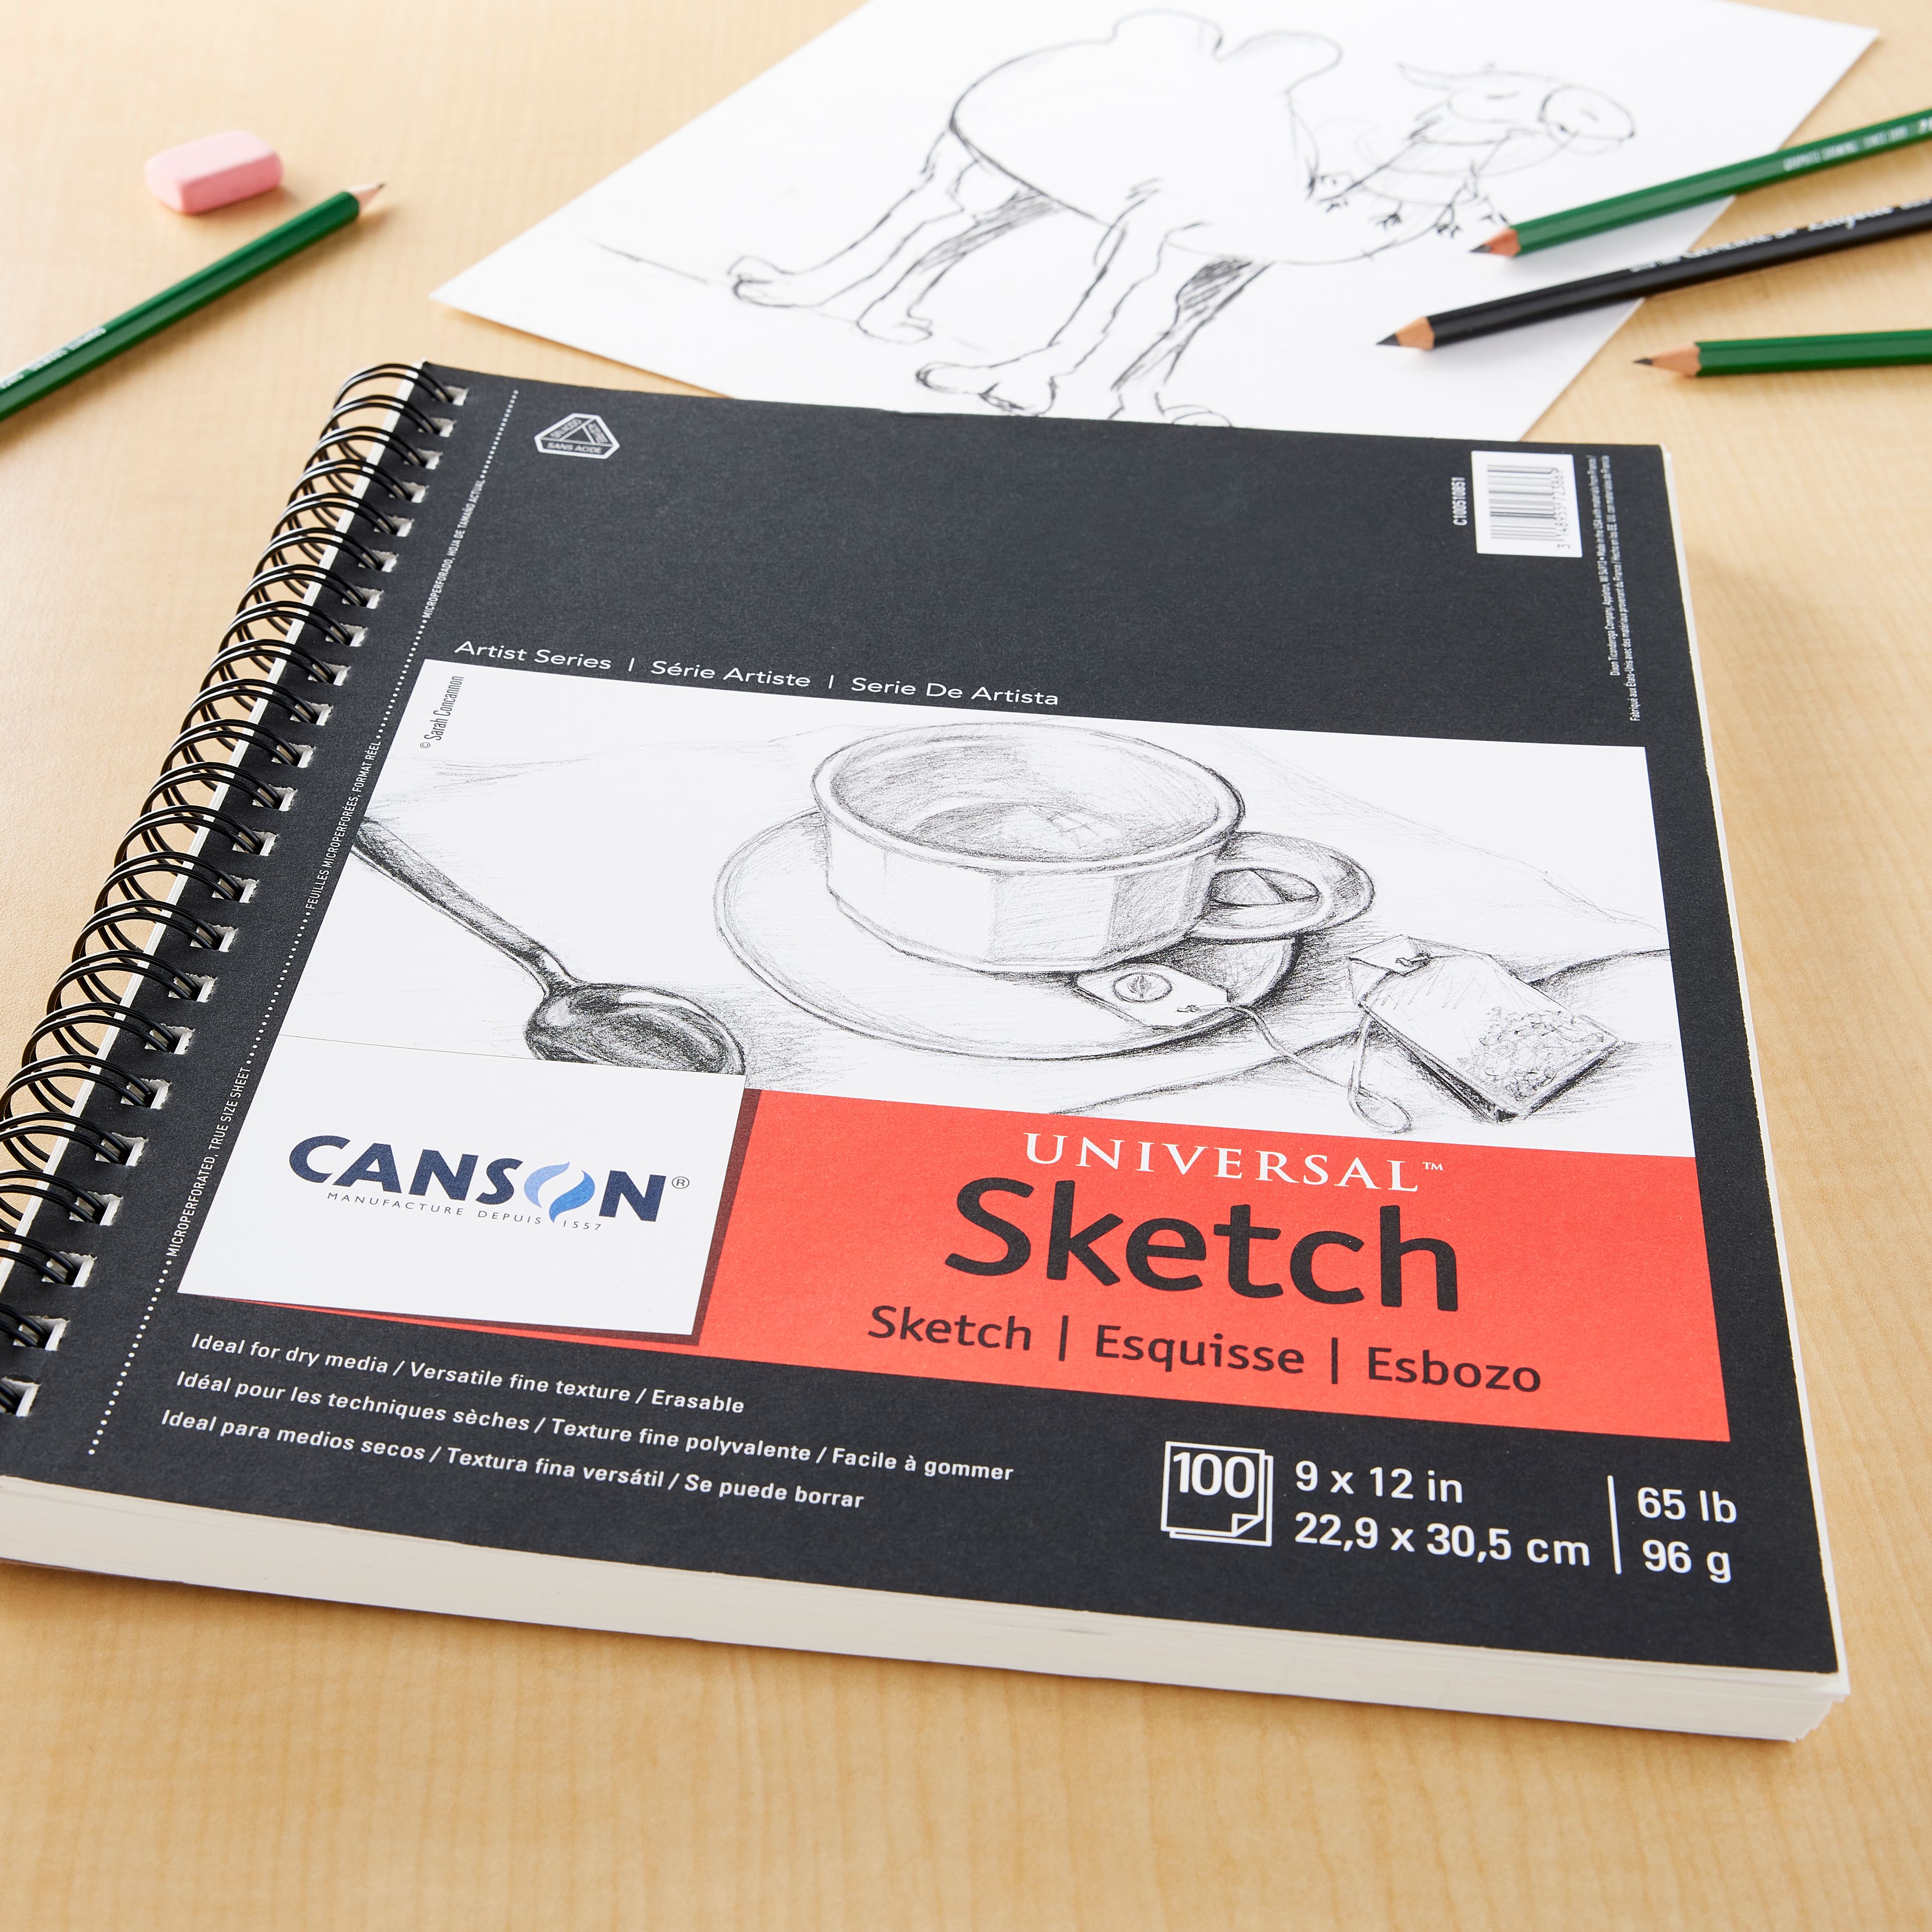 Update more than 72 canson sketch pad latest - in.eteachers